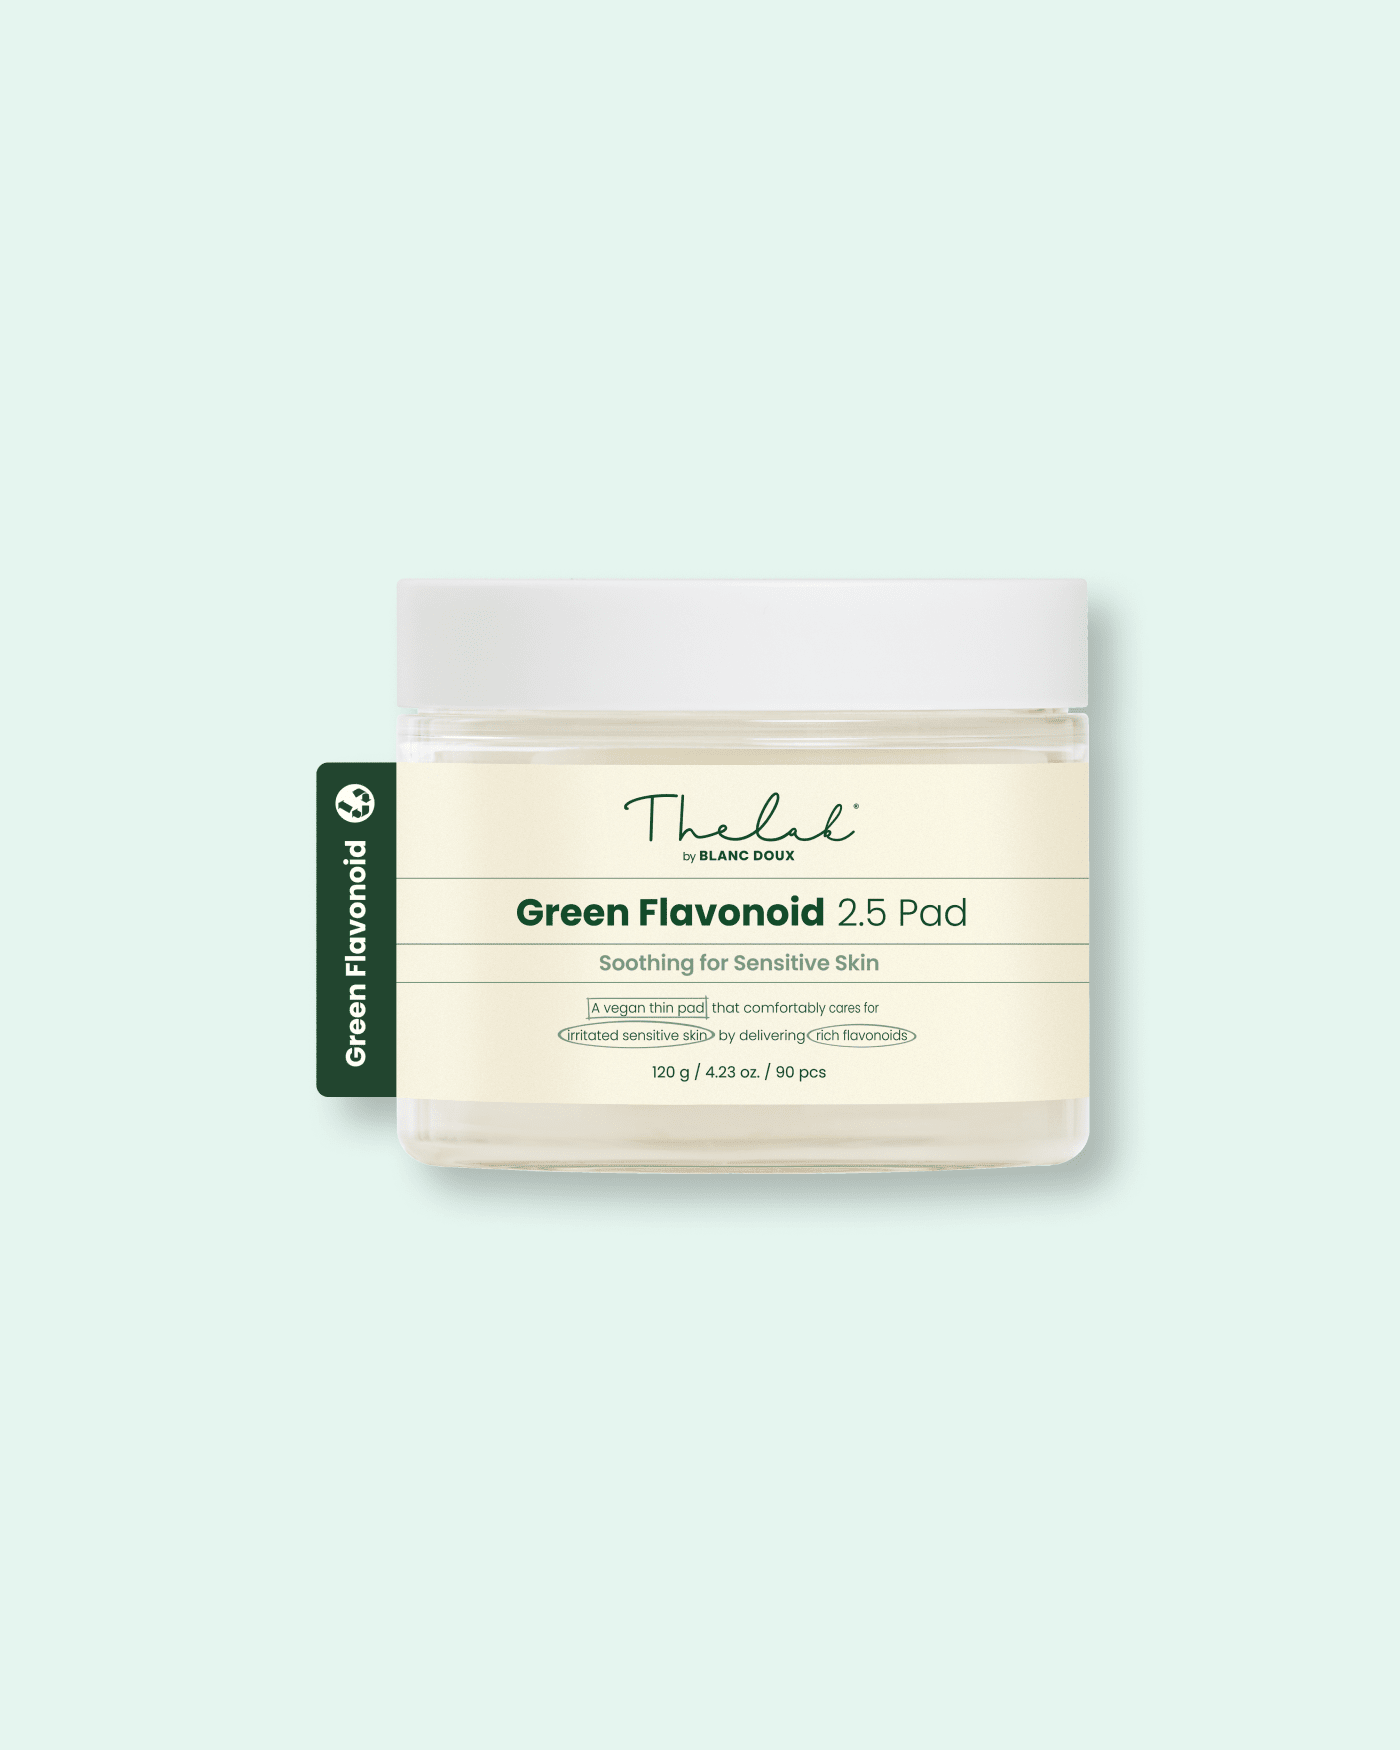 Green Flavonoid 2.5 Pads Toner The Lab By Blanc Doux 